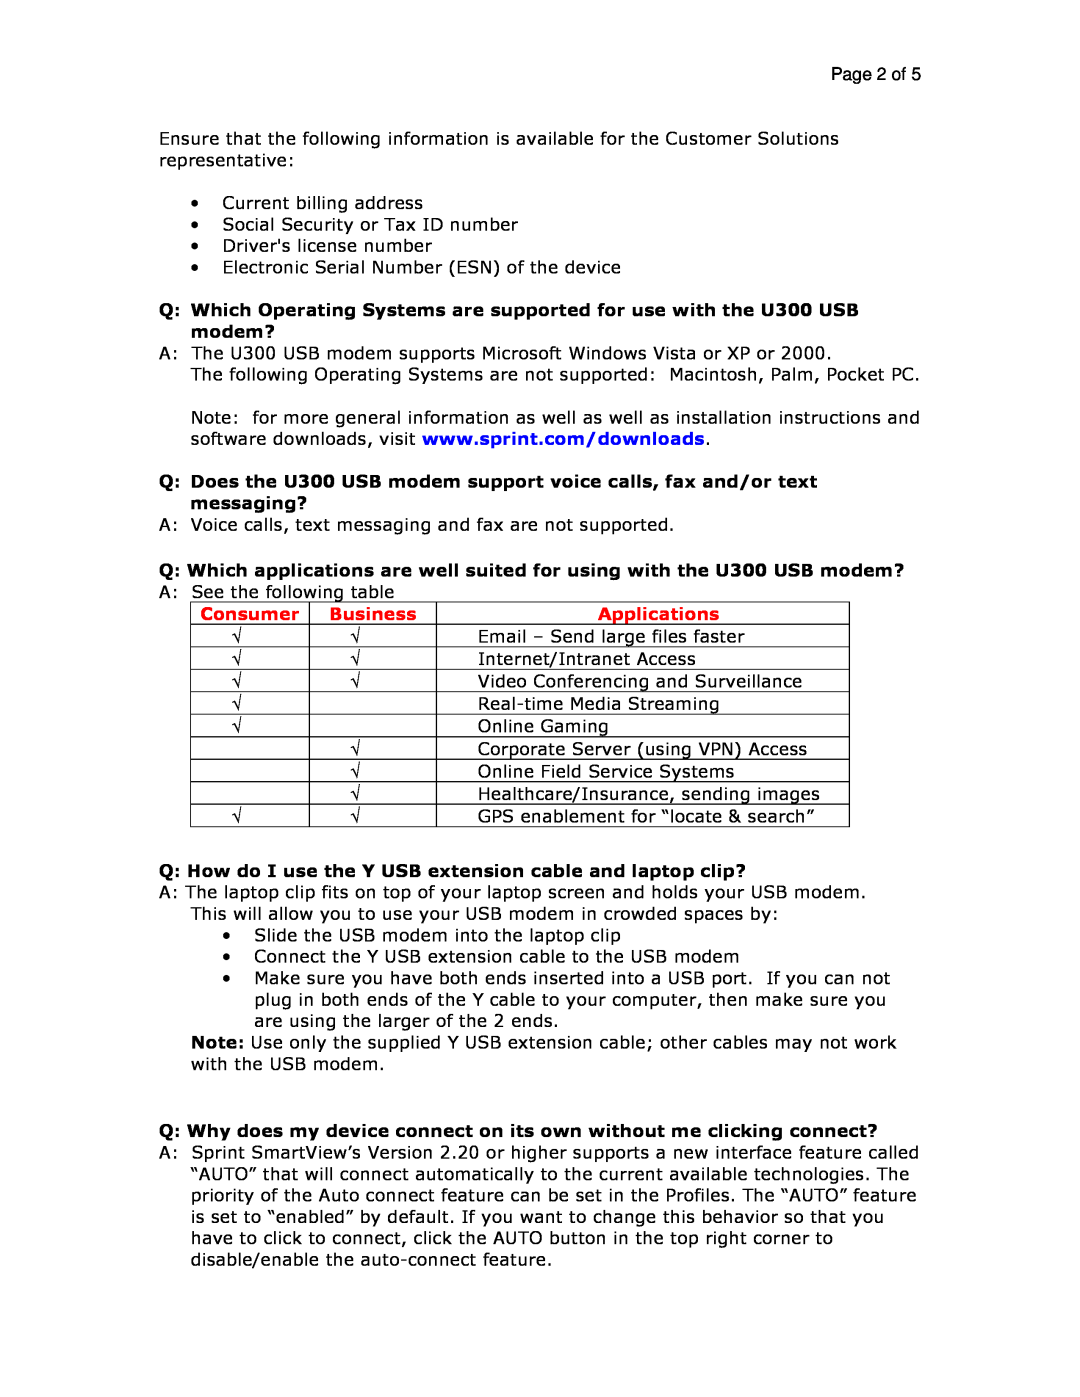 Sprint Nextel U300 manual Page 2 of, Consumer, Business, Applications 